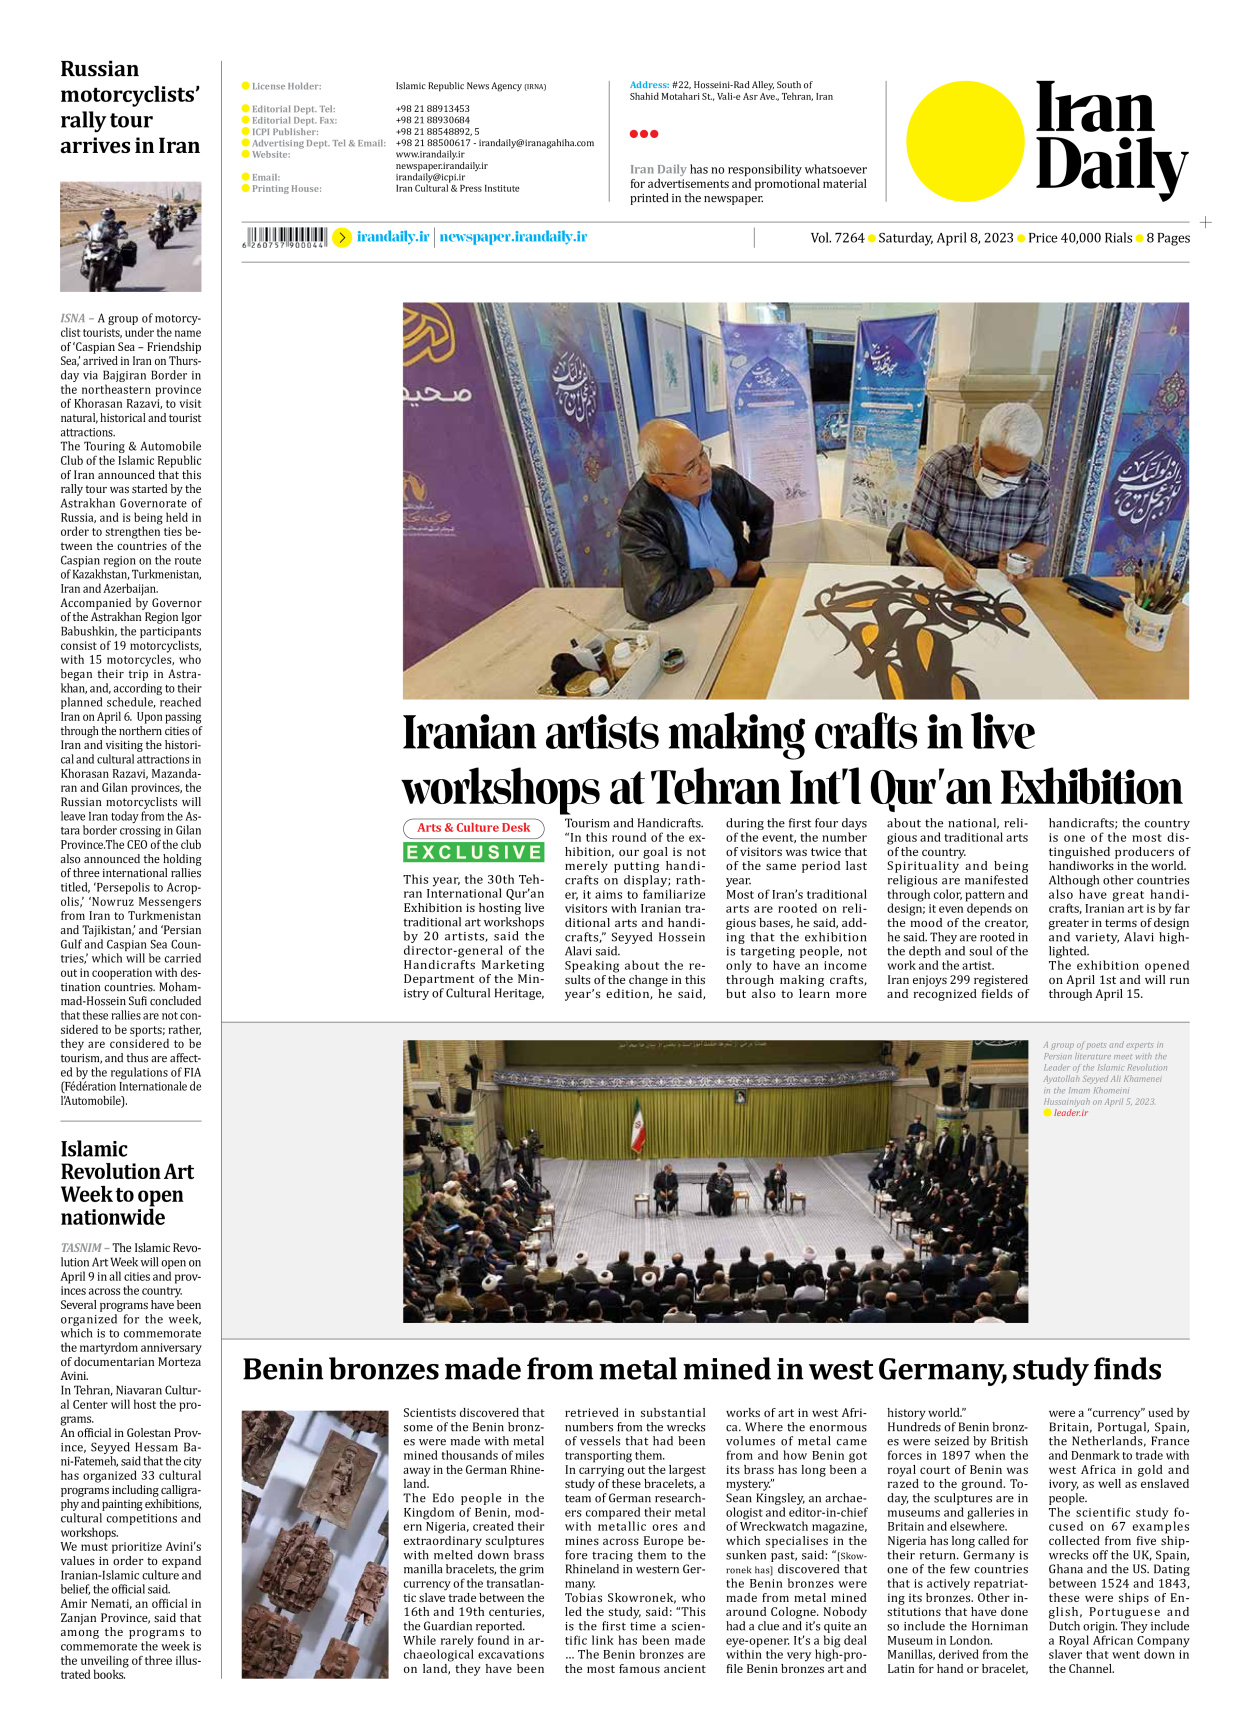 Iran Daily - Number Seven Thousand Two Hundred and Sixty Four - 08 April 2023 - Page 8